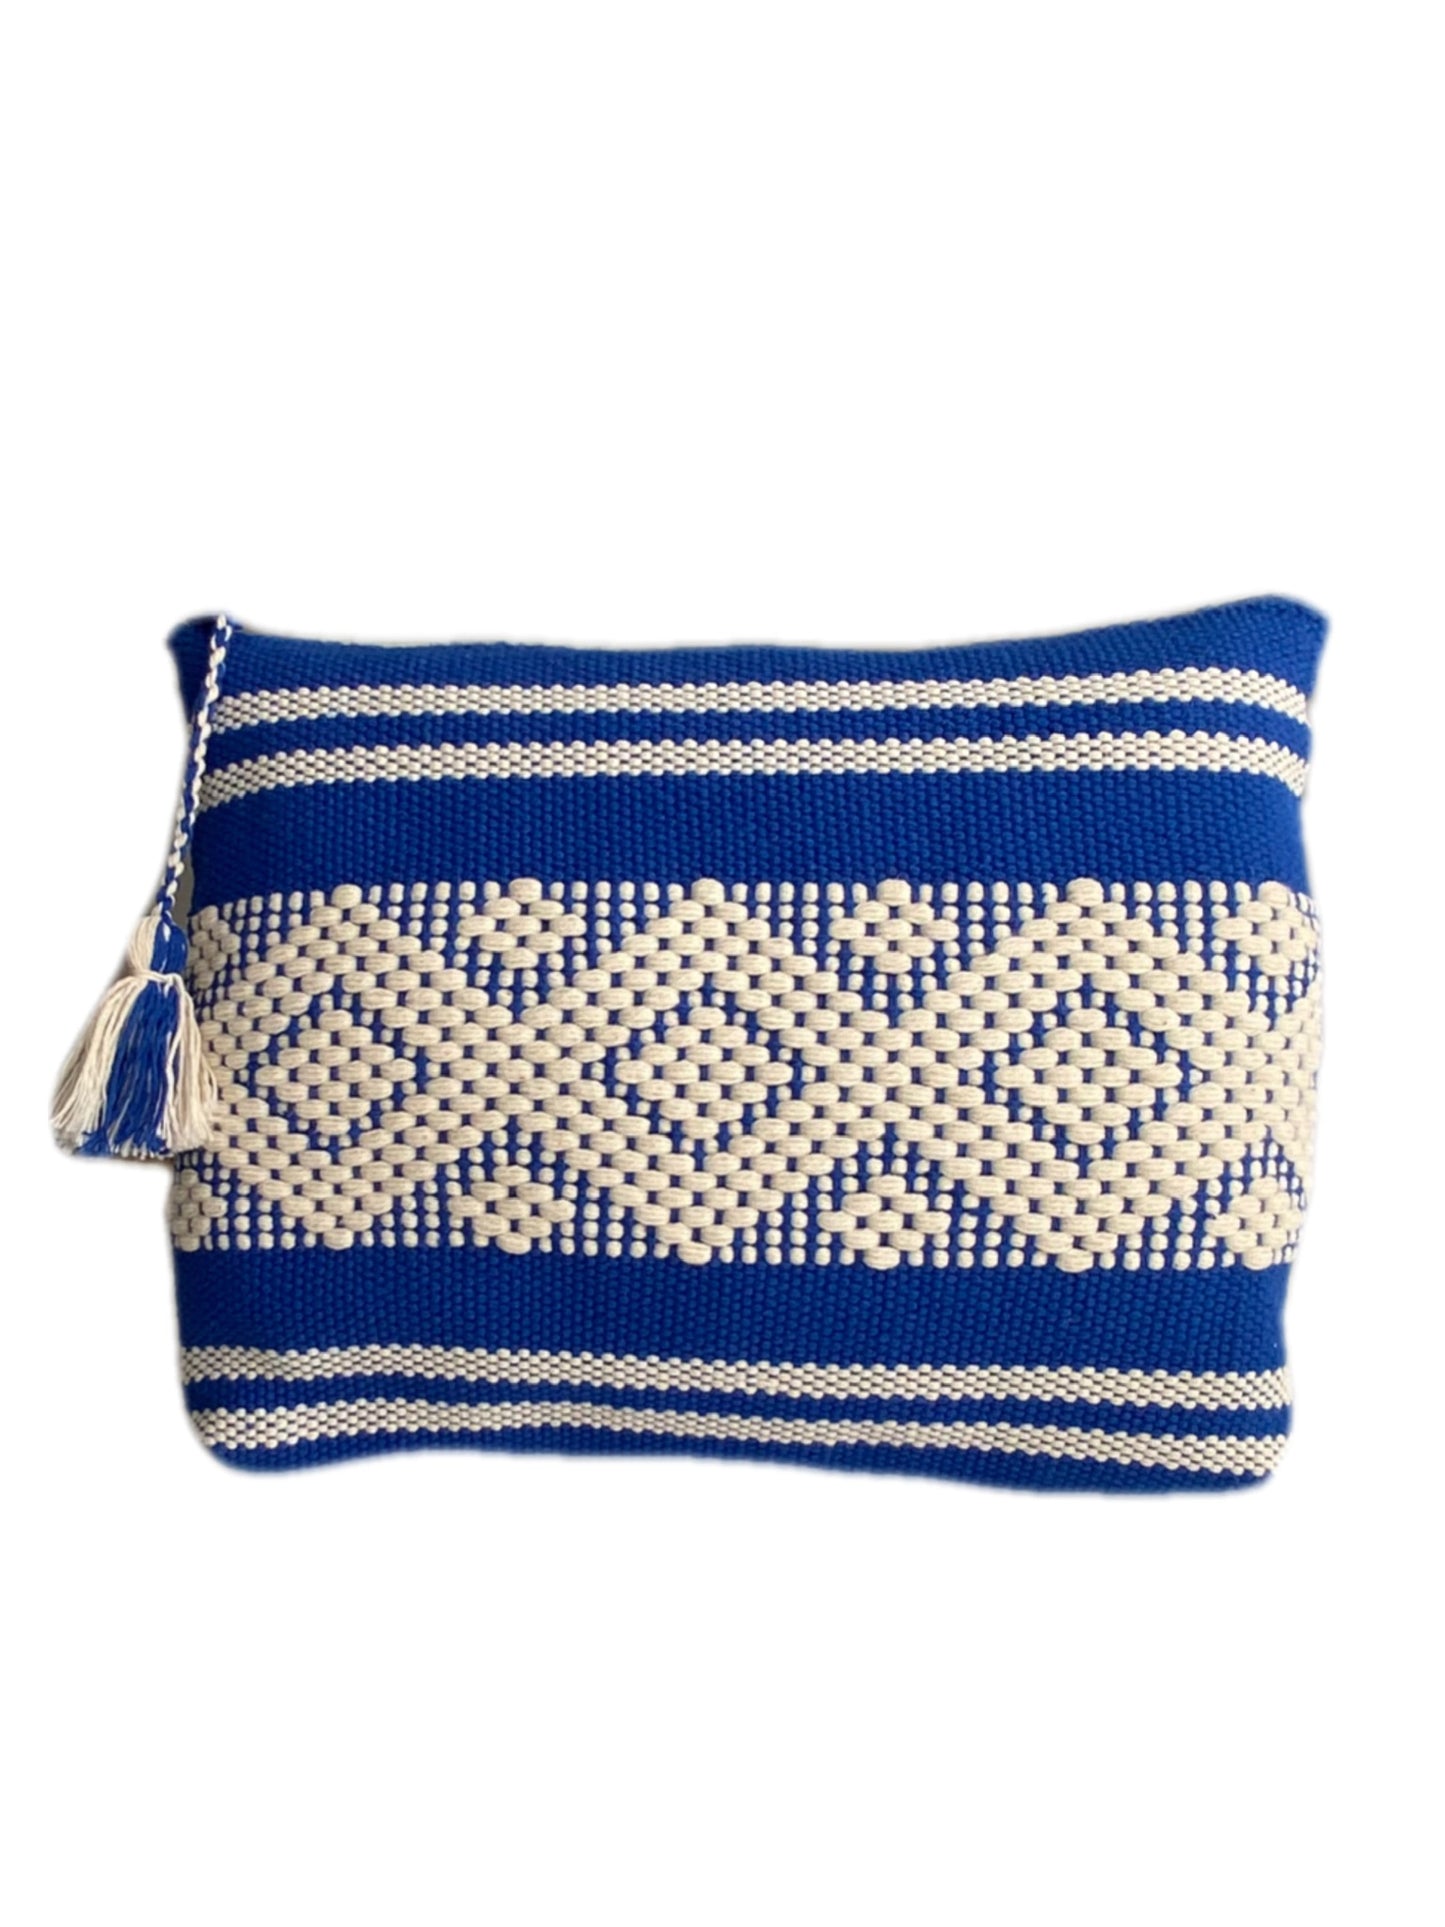 Handwoven cosmetic bag in royal blue and crisp white hues